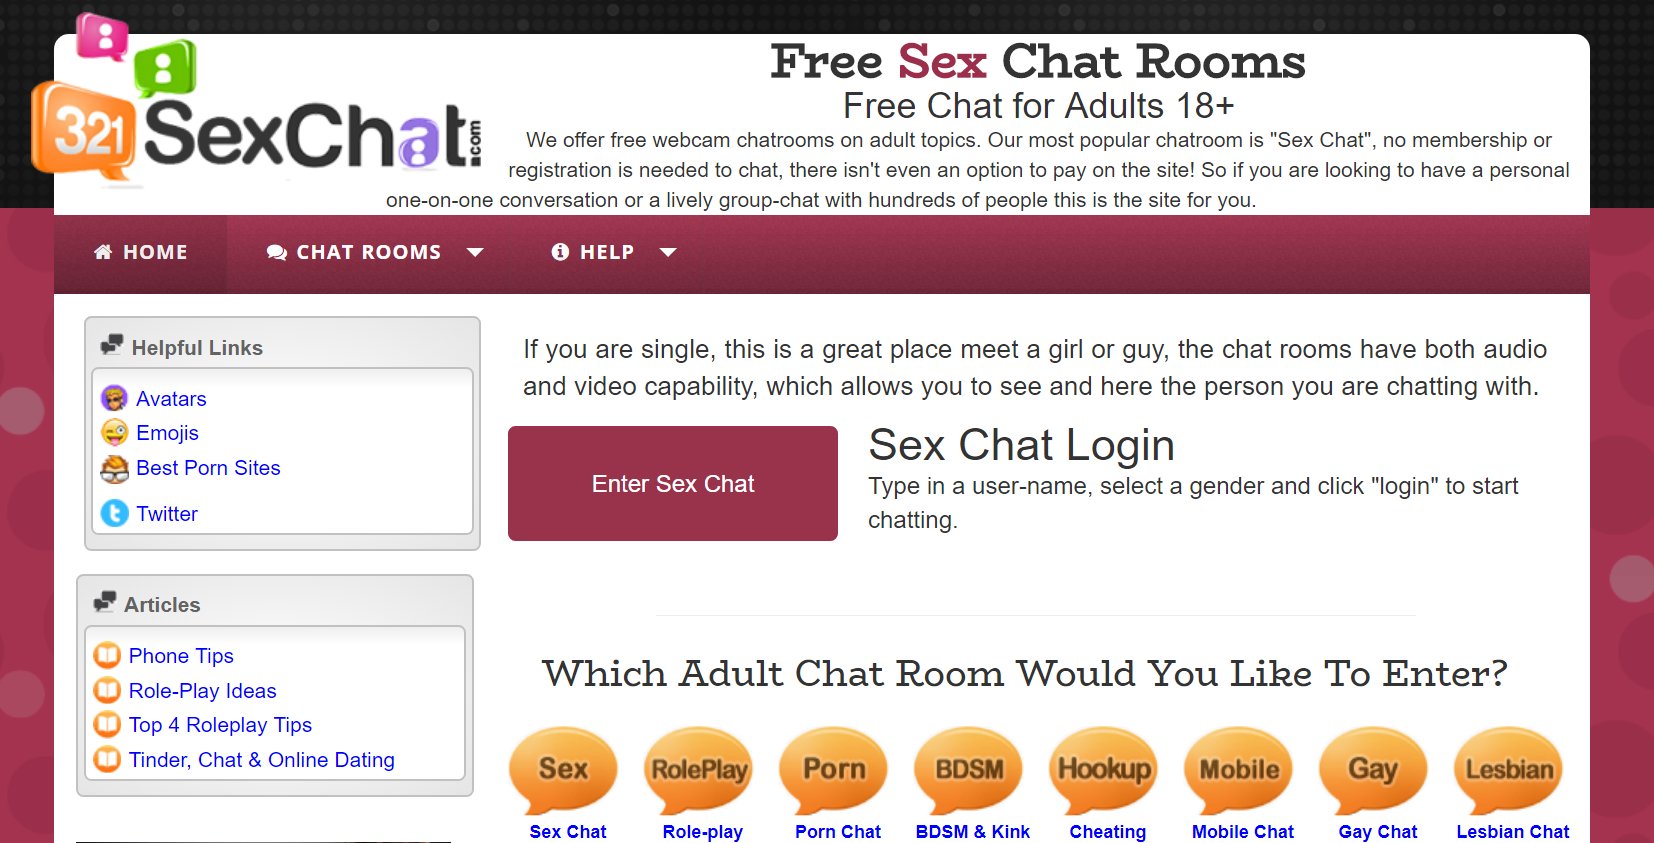 Free Sex Chats With No Registration - 321SexChat.com (@321SexChat) / Twitter